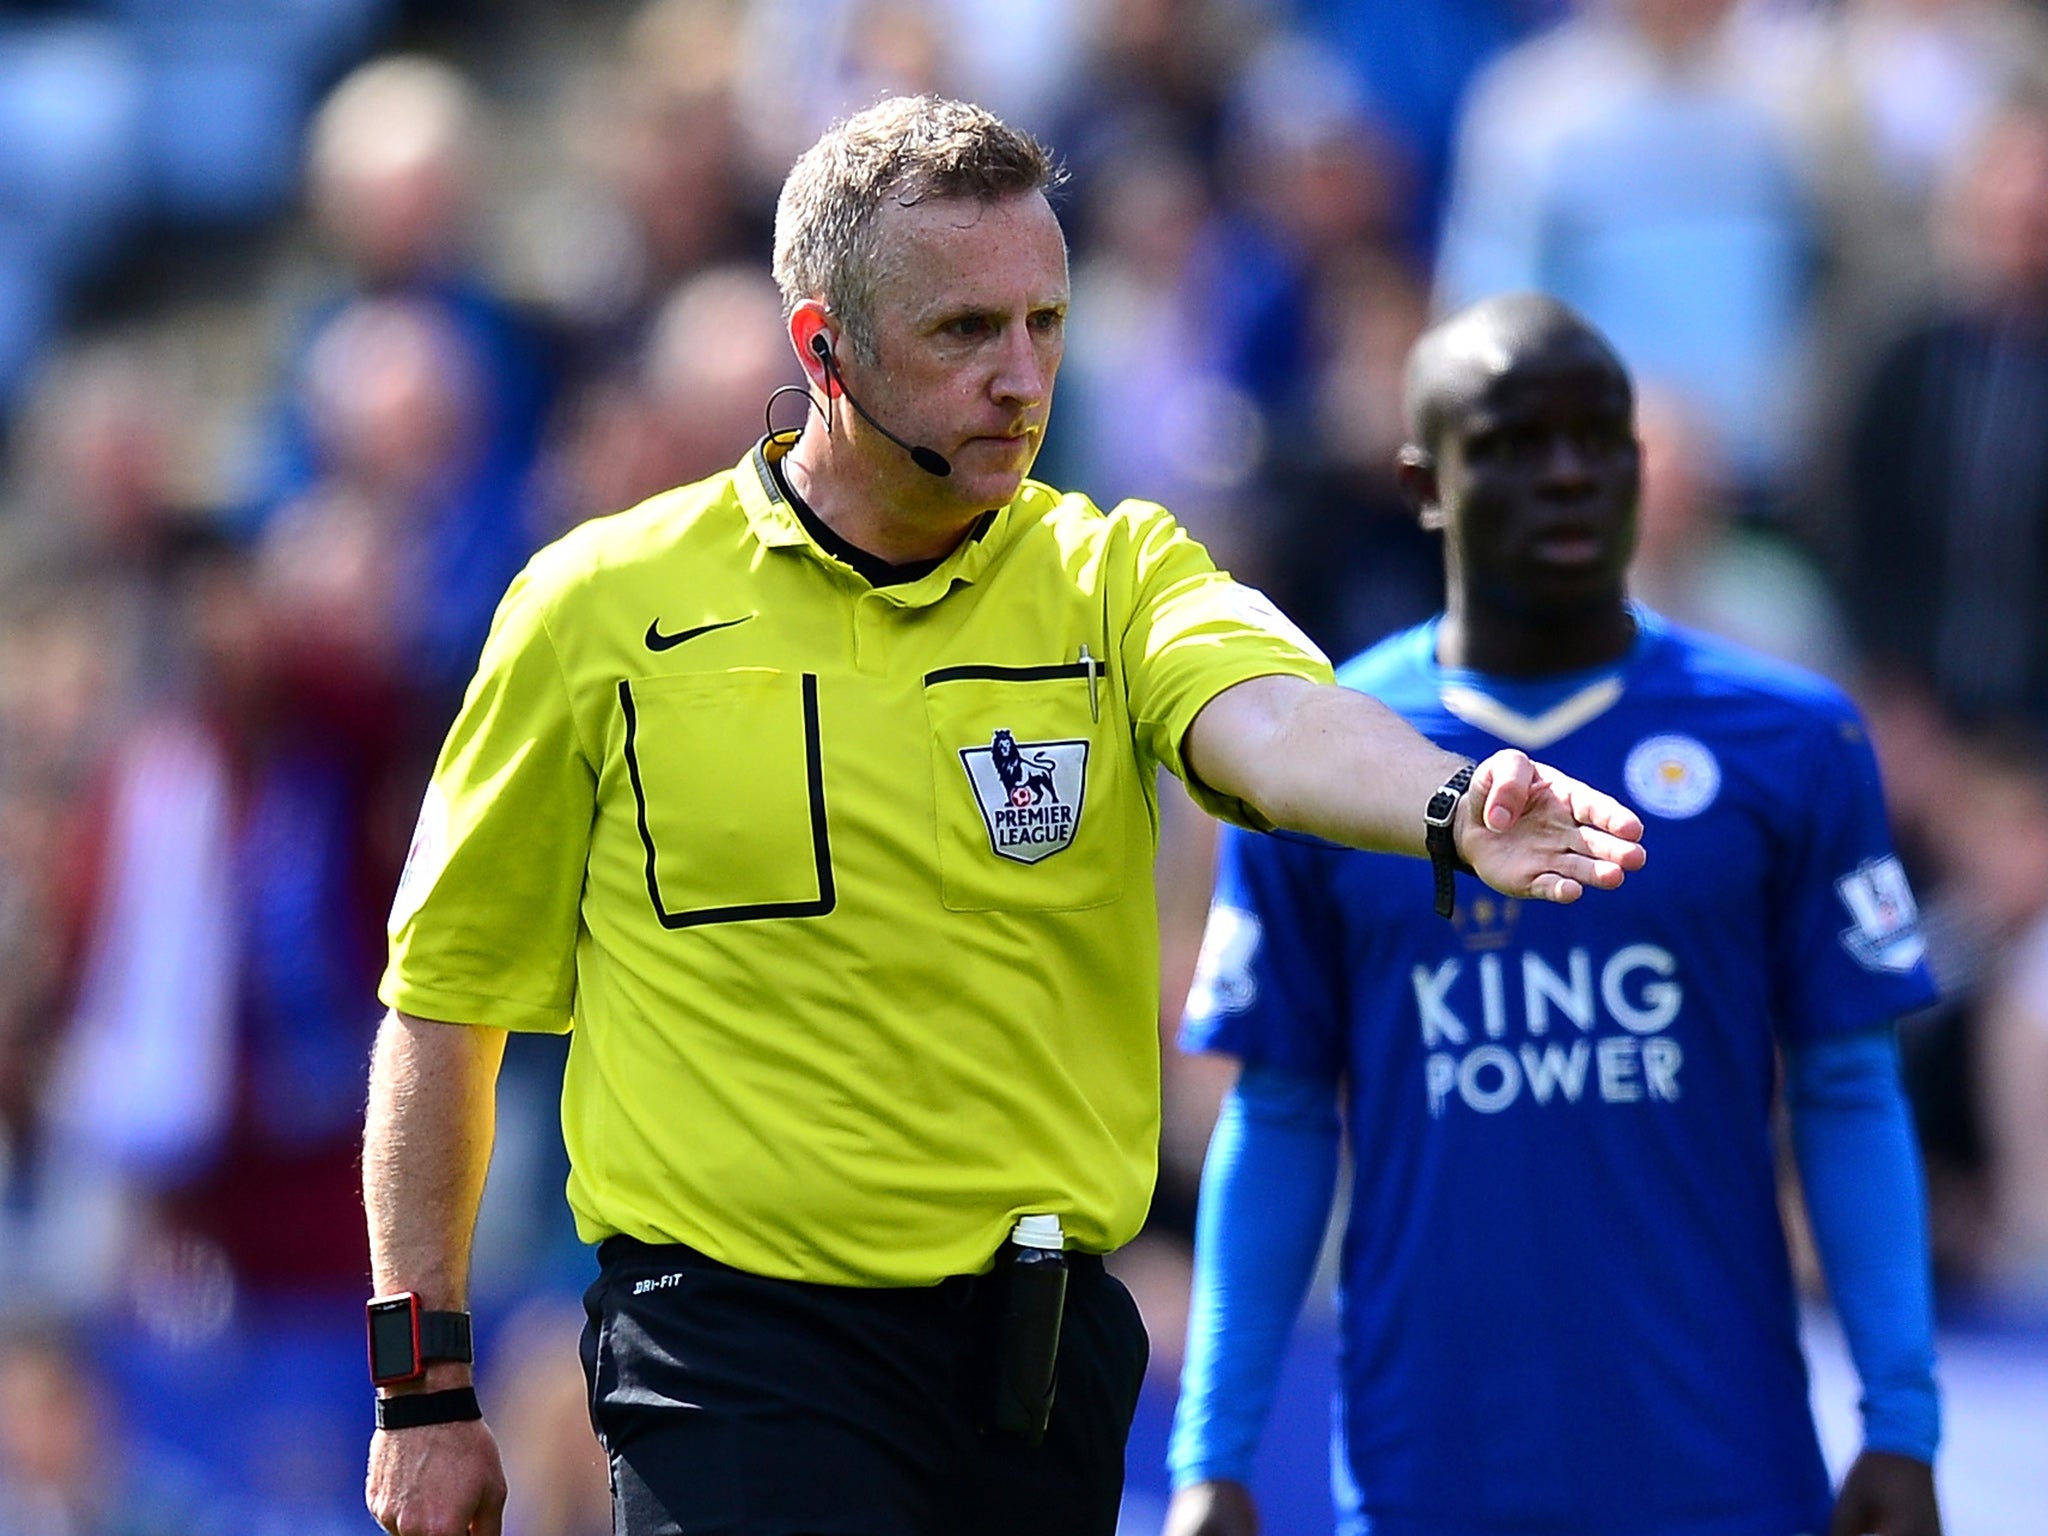 Moss also caused controversy by awarding two late penalties at the King Power Stadium